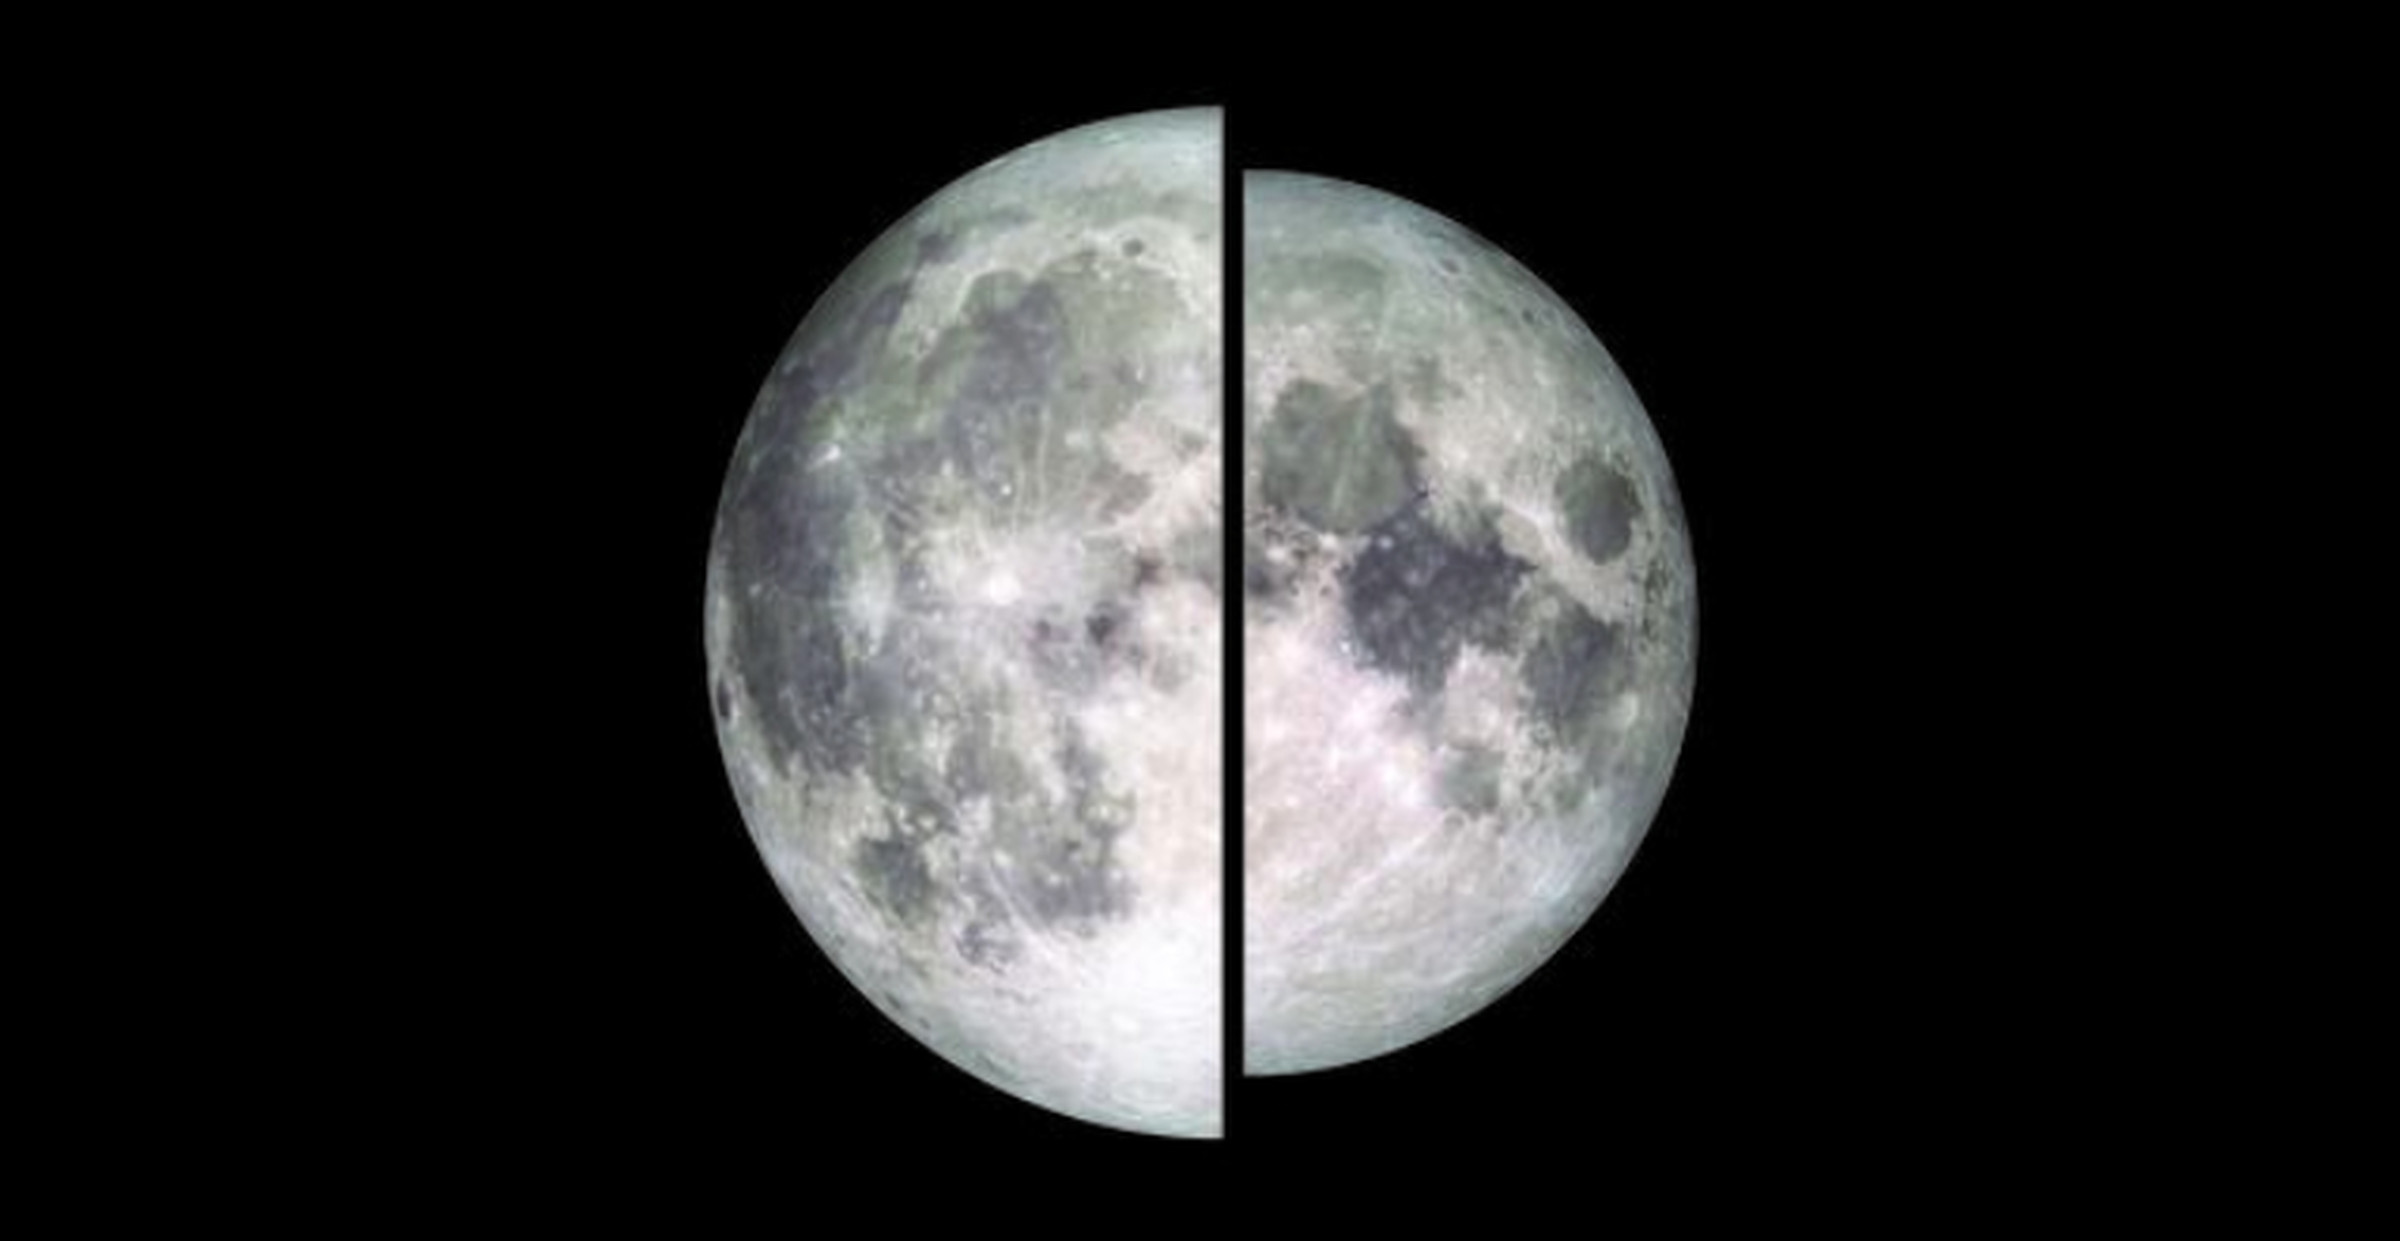 The size of a supermoon (L) compared to the Moon when it is farthest away from Earth on its orbit (R).